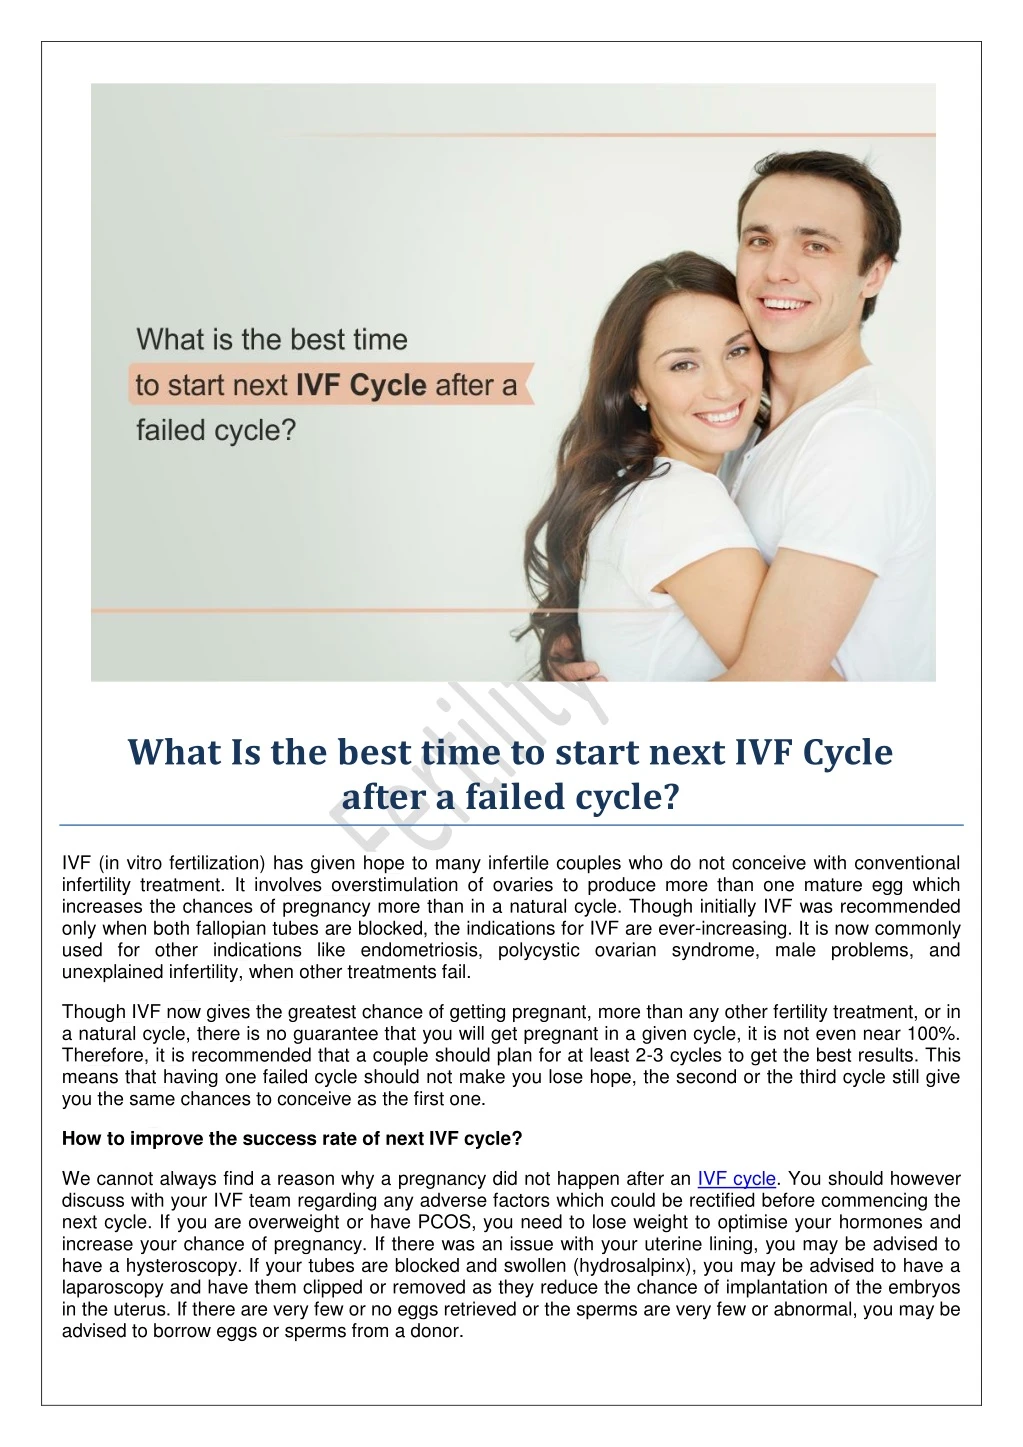 what is the best time to start next ivf cycle